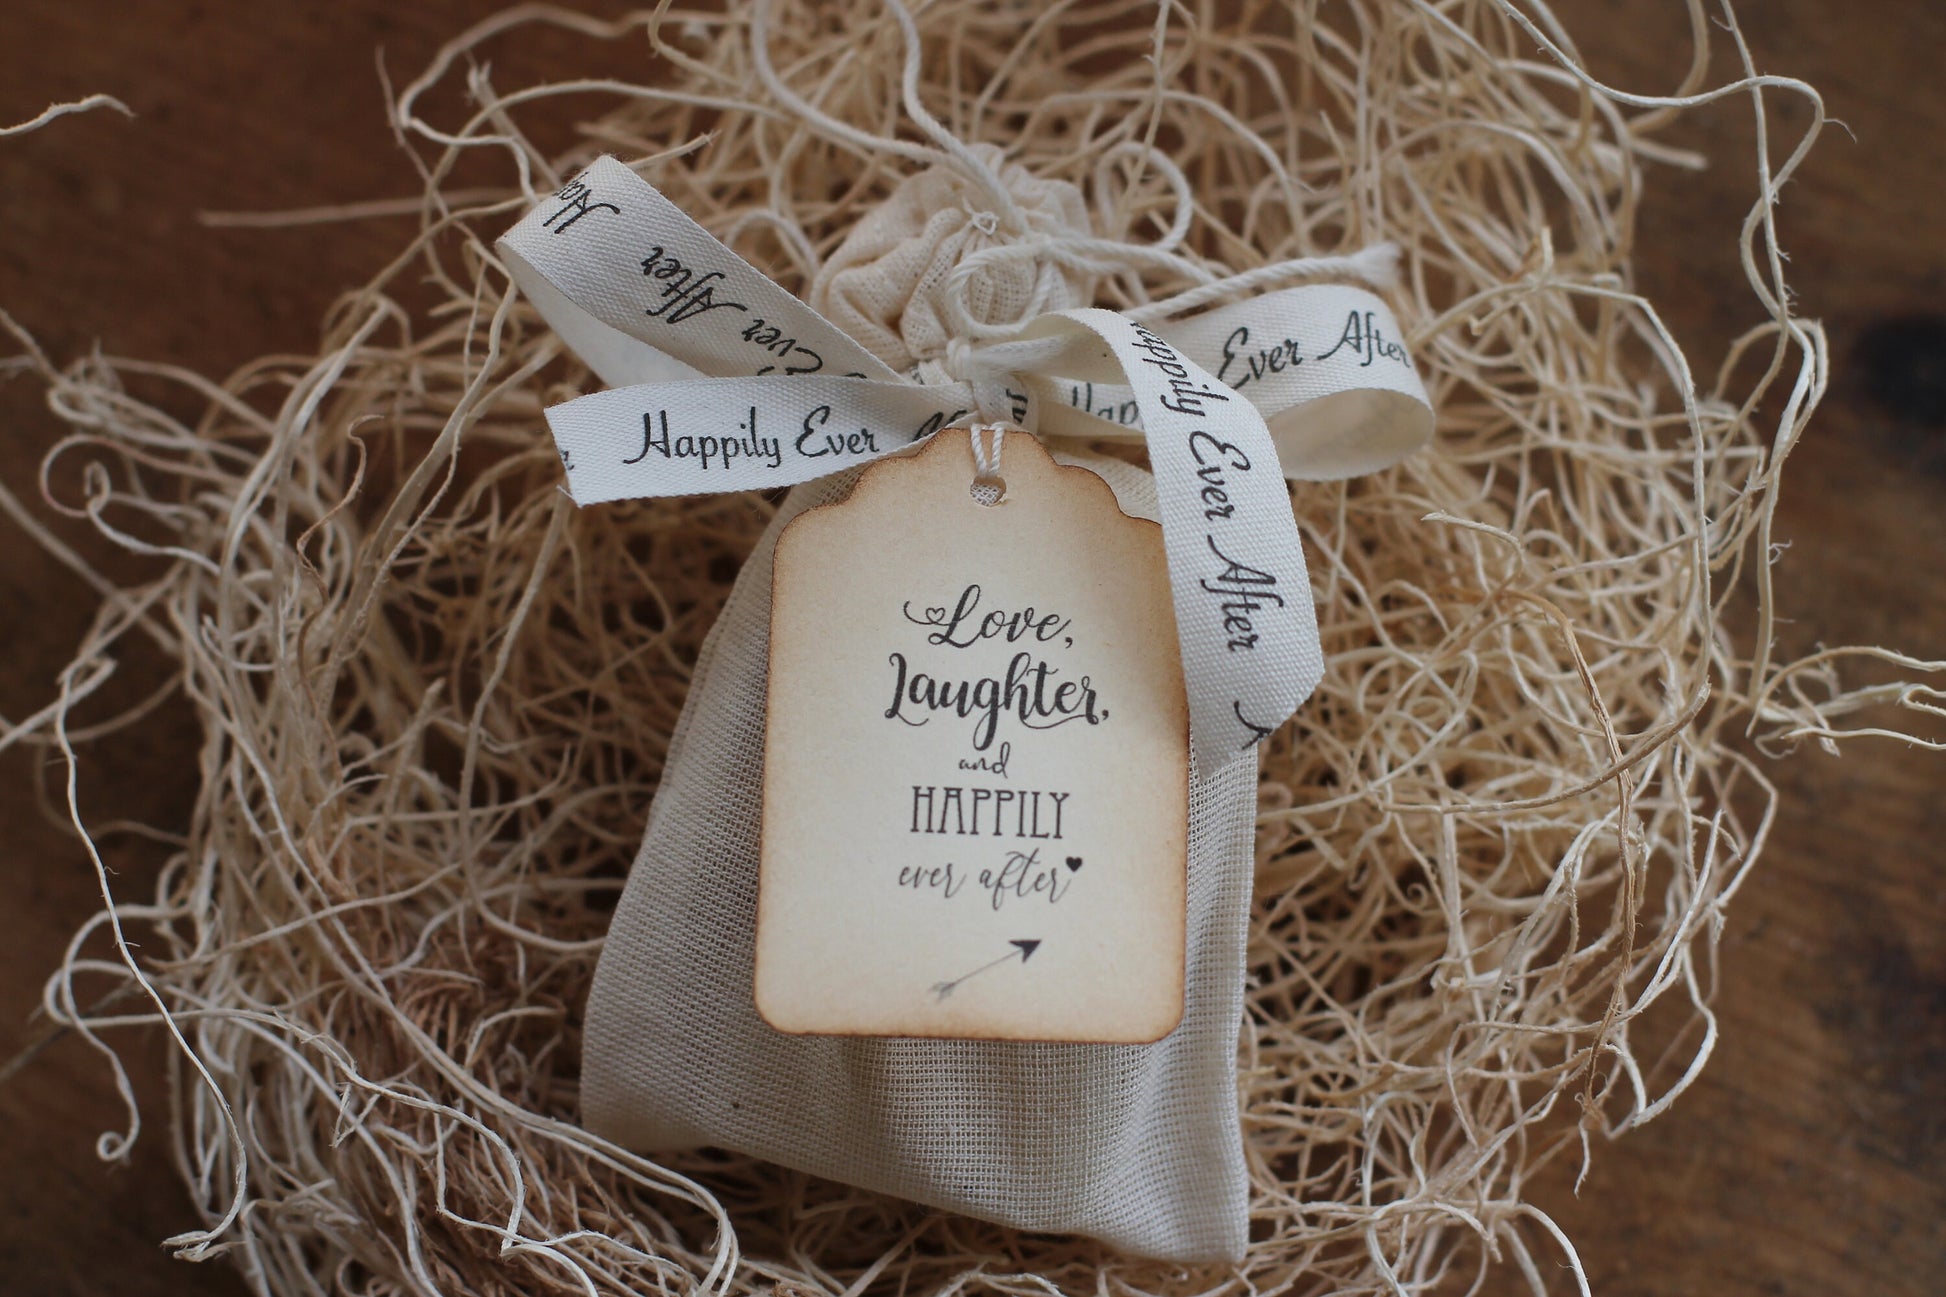 Happily Ever After Wedding Favor- Weddings-Bridal-Baby-Showers-Place Card Favors-Save the Date-Belle Savon Vermont